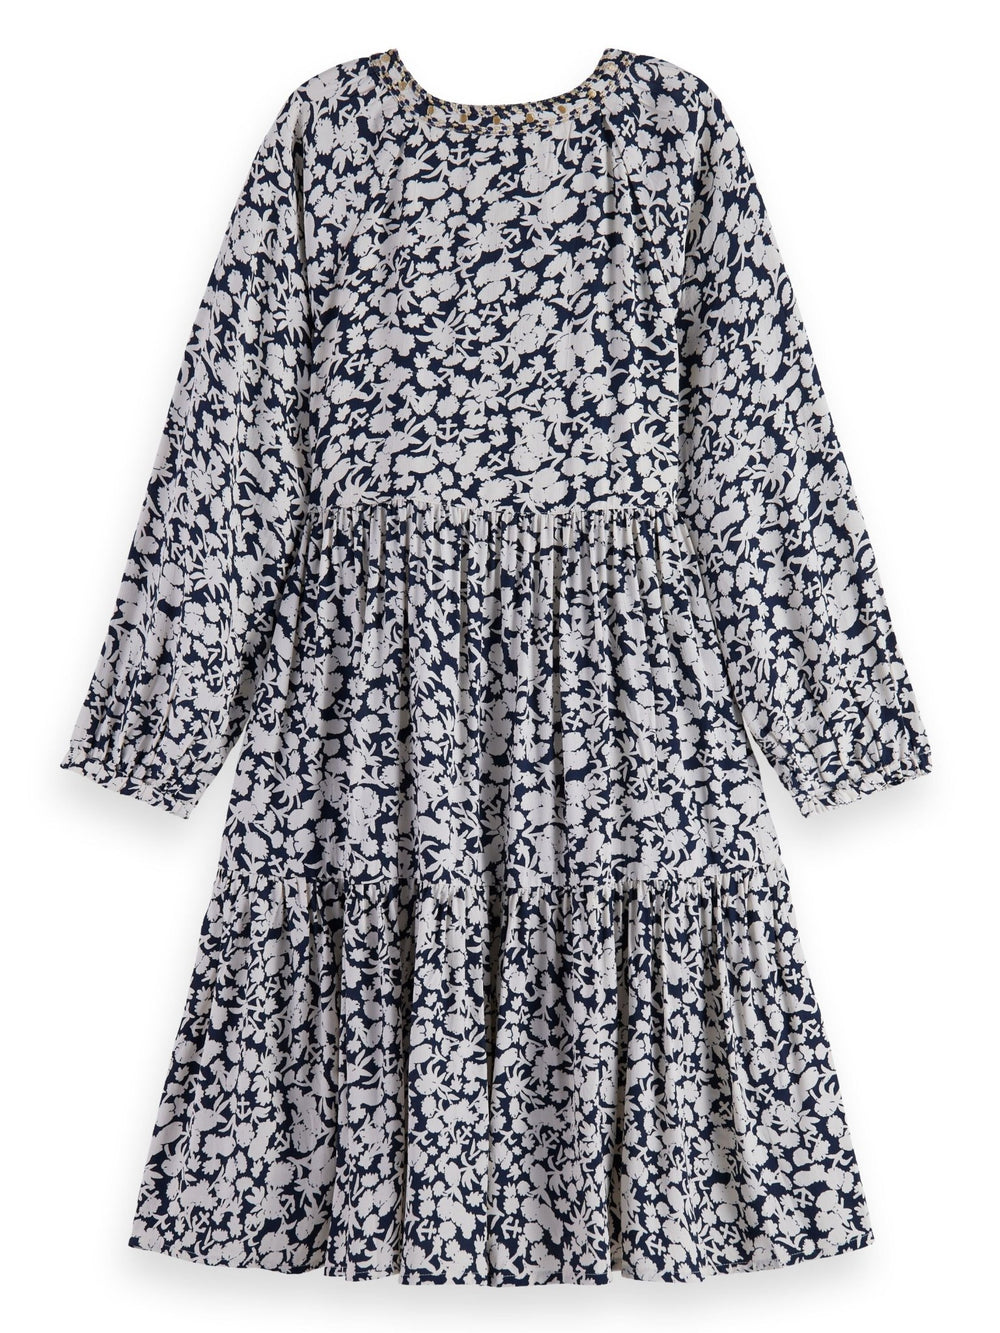 All Over Printed and Embellished Dress - Anchor Flo - Posh New York